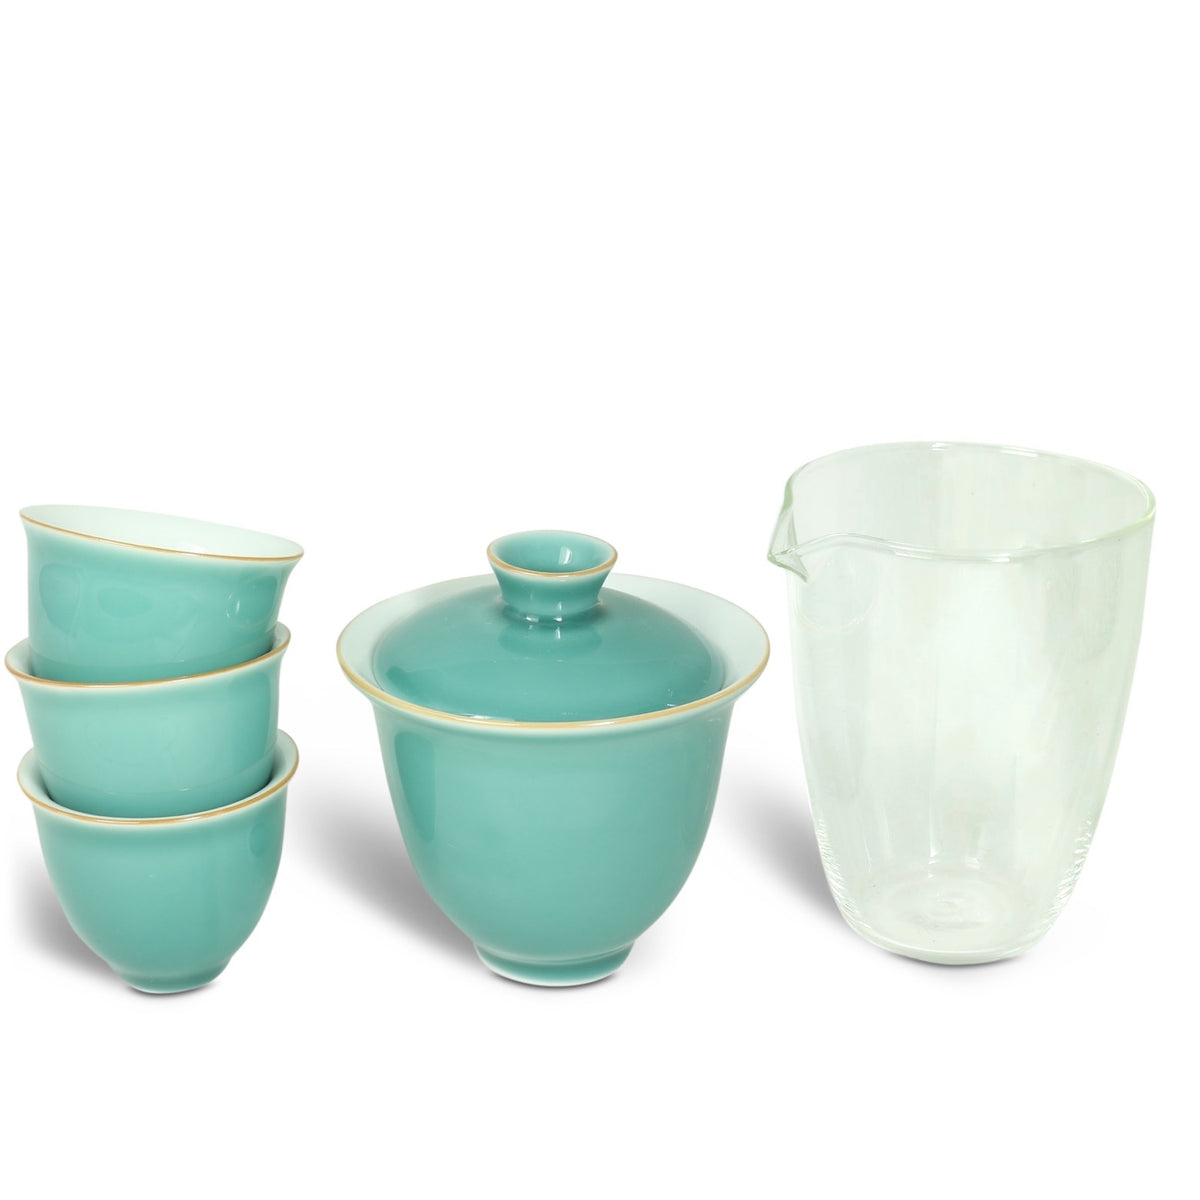 Ceramic And Glass Practical Travel Tea Set Case With 3 Cups